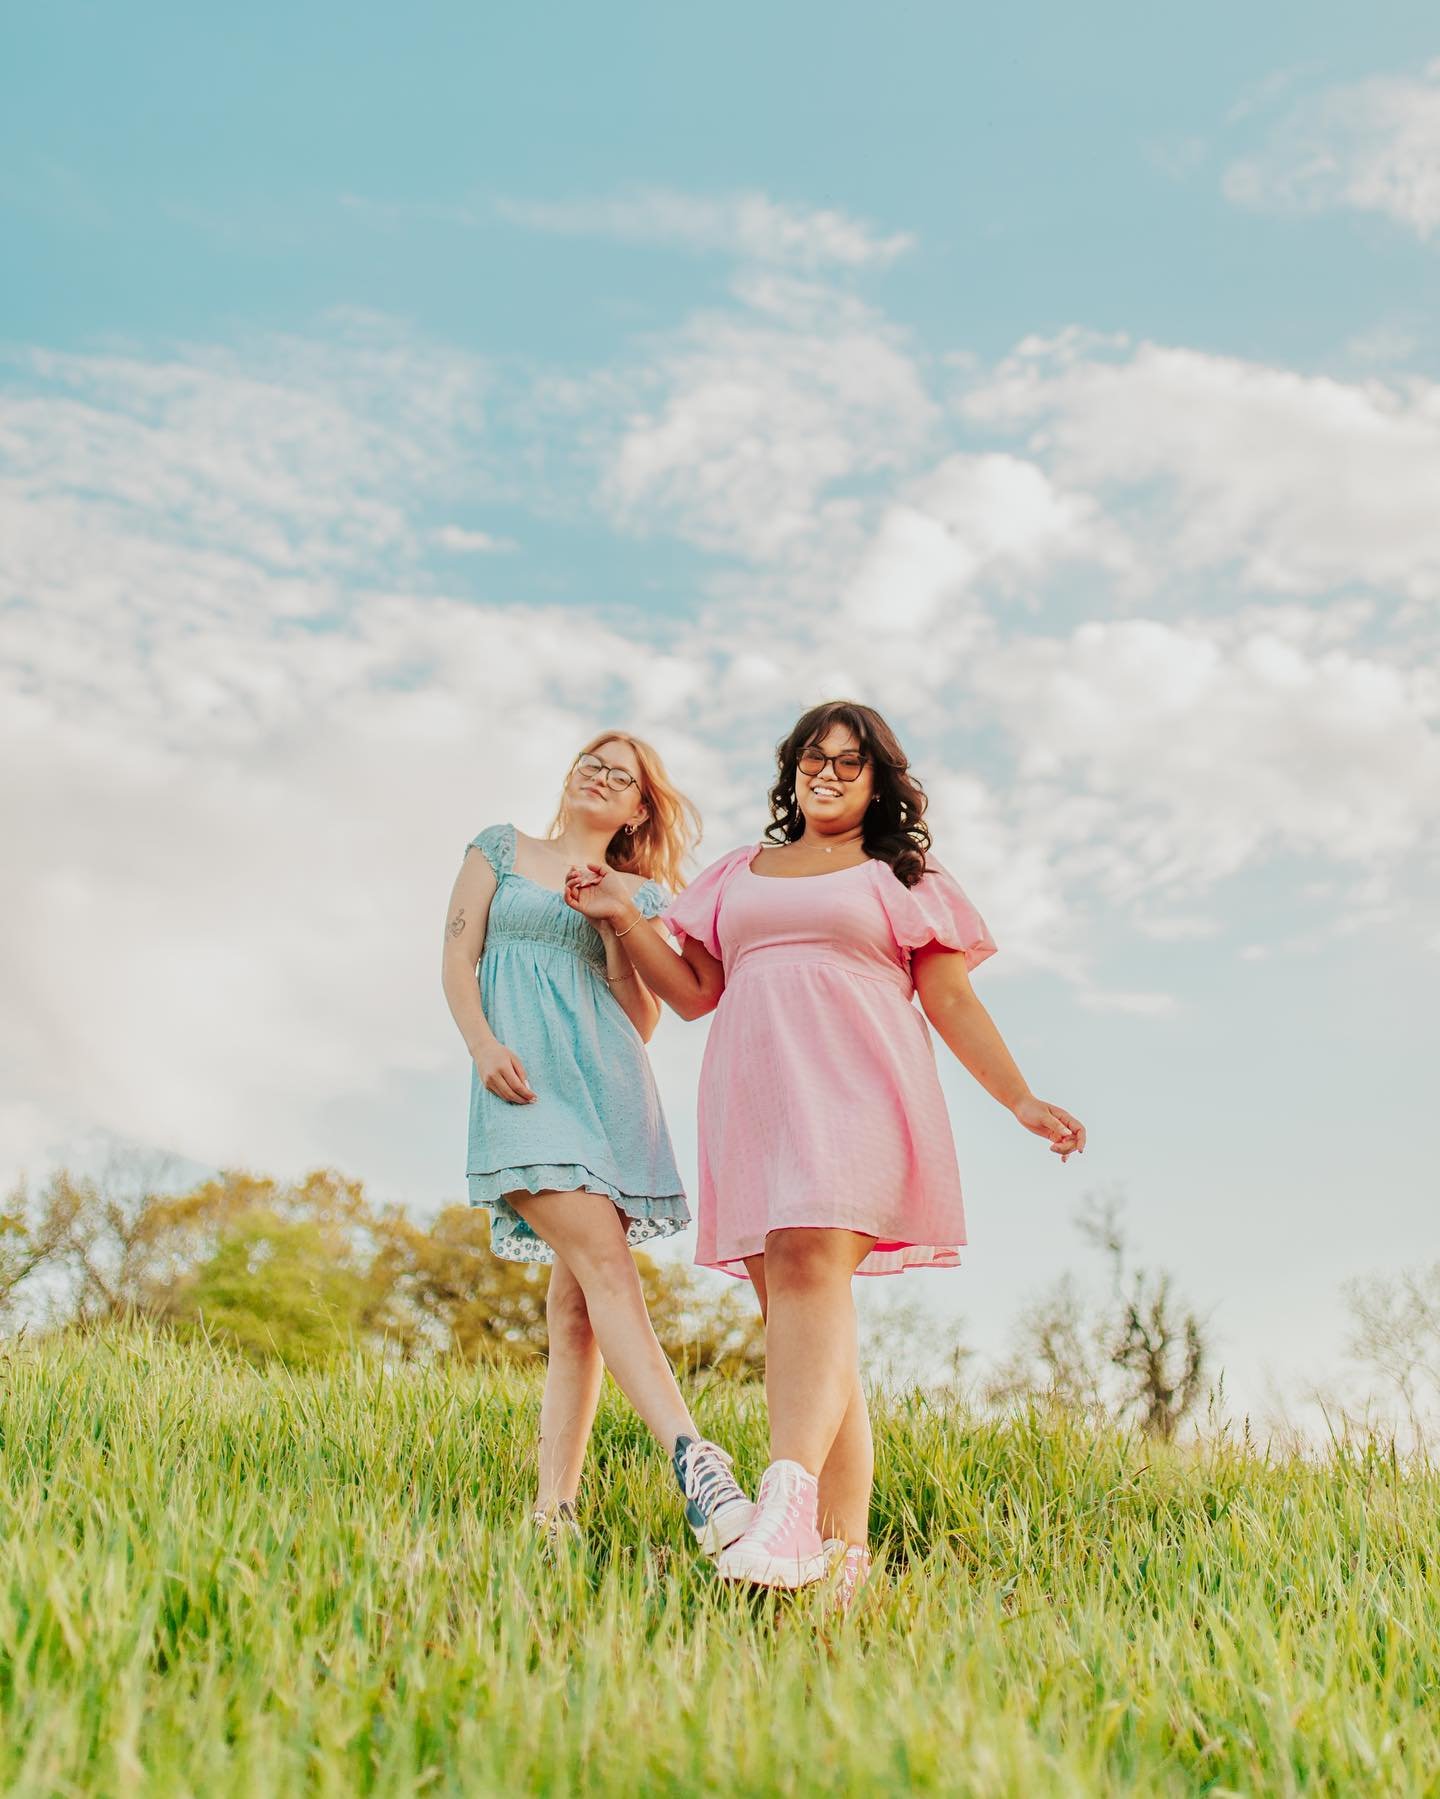 Bestie photos with Marissa + Ashlyn!!! 🩵✌️🌸⭐️💗🦋☀️✨

These girls graduATE their photoshoot!!!! 😤🤪🎓⭐️✨ THE best time with these two, celebrating with nature exploring (we had quite the adventure HAHA), laughing a ton, and creating some sweet mem